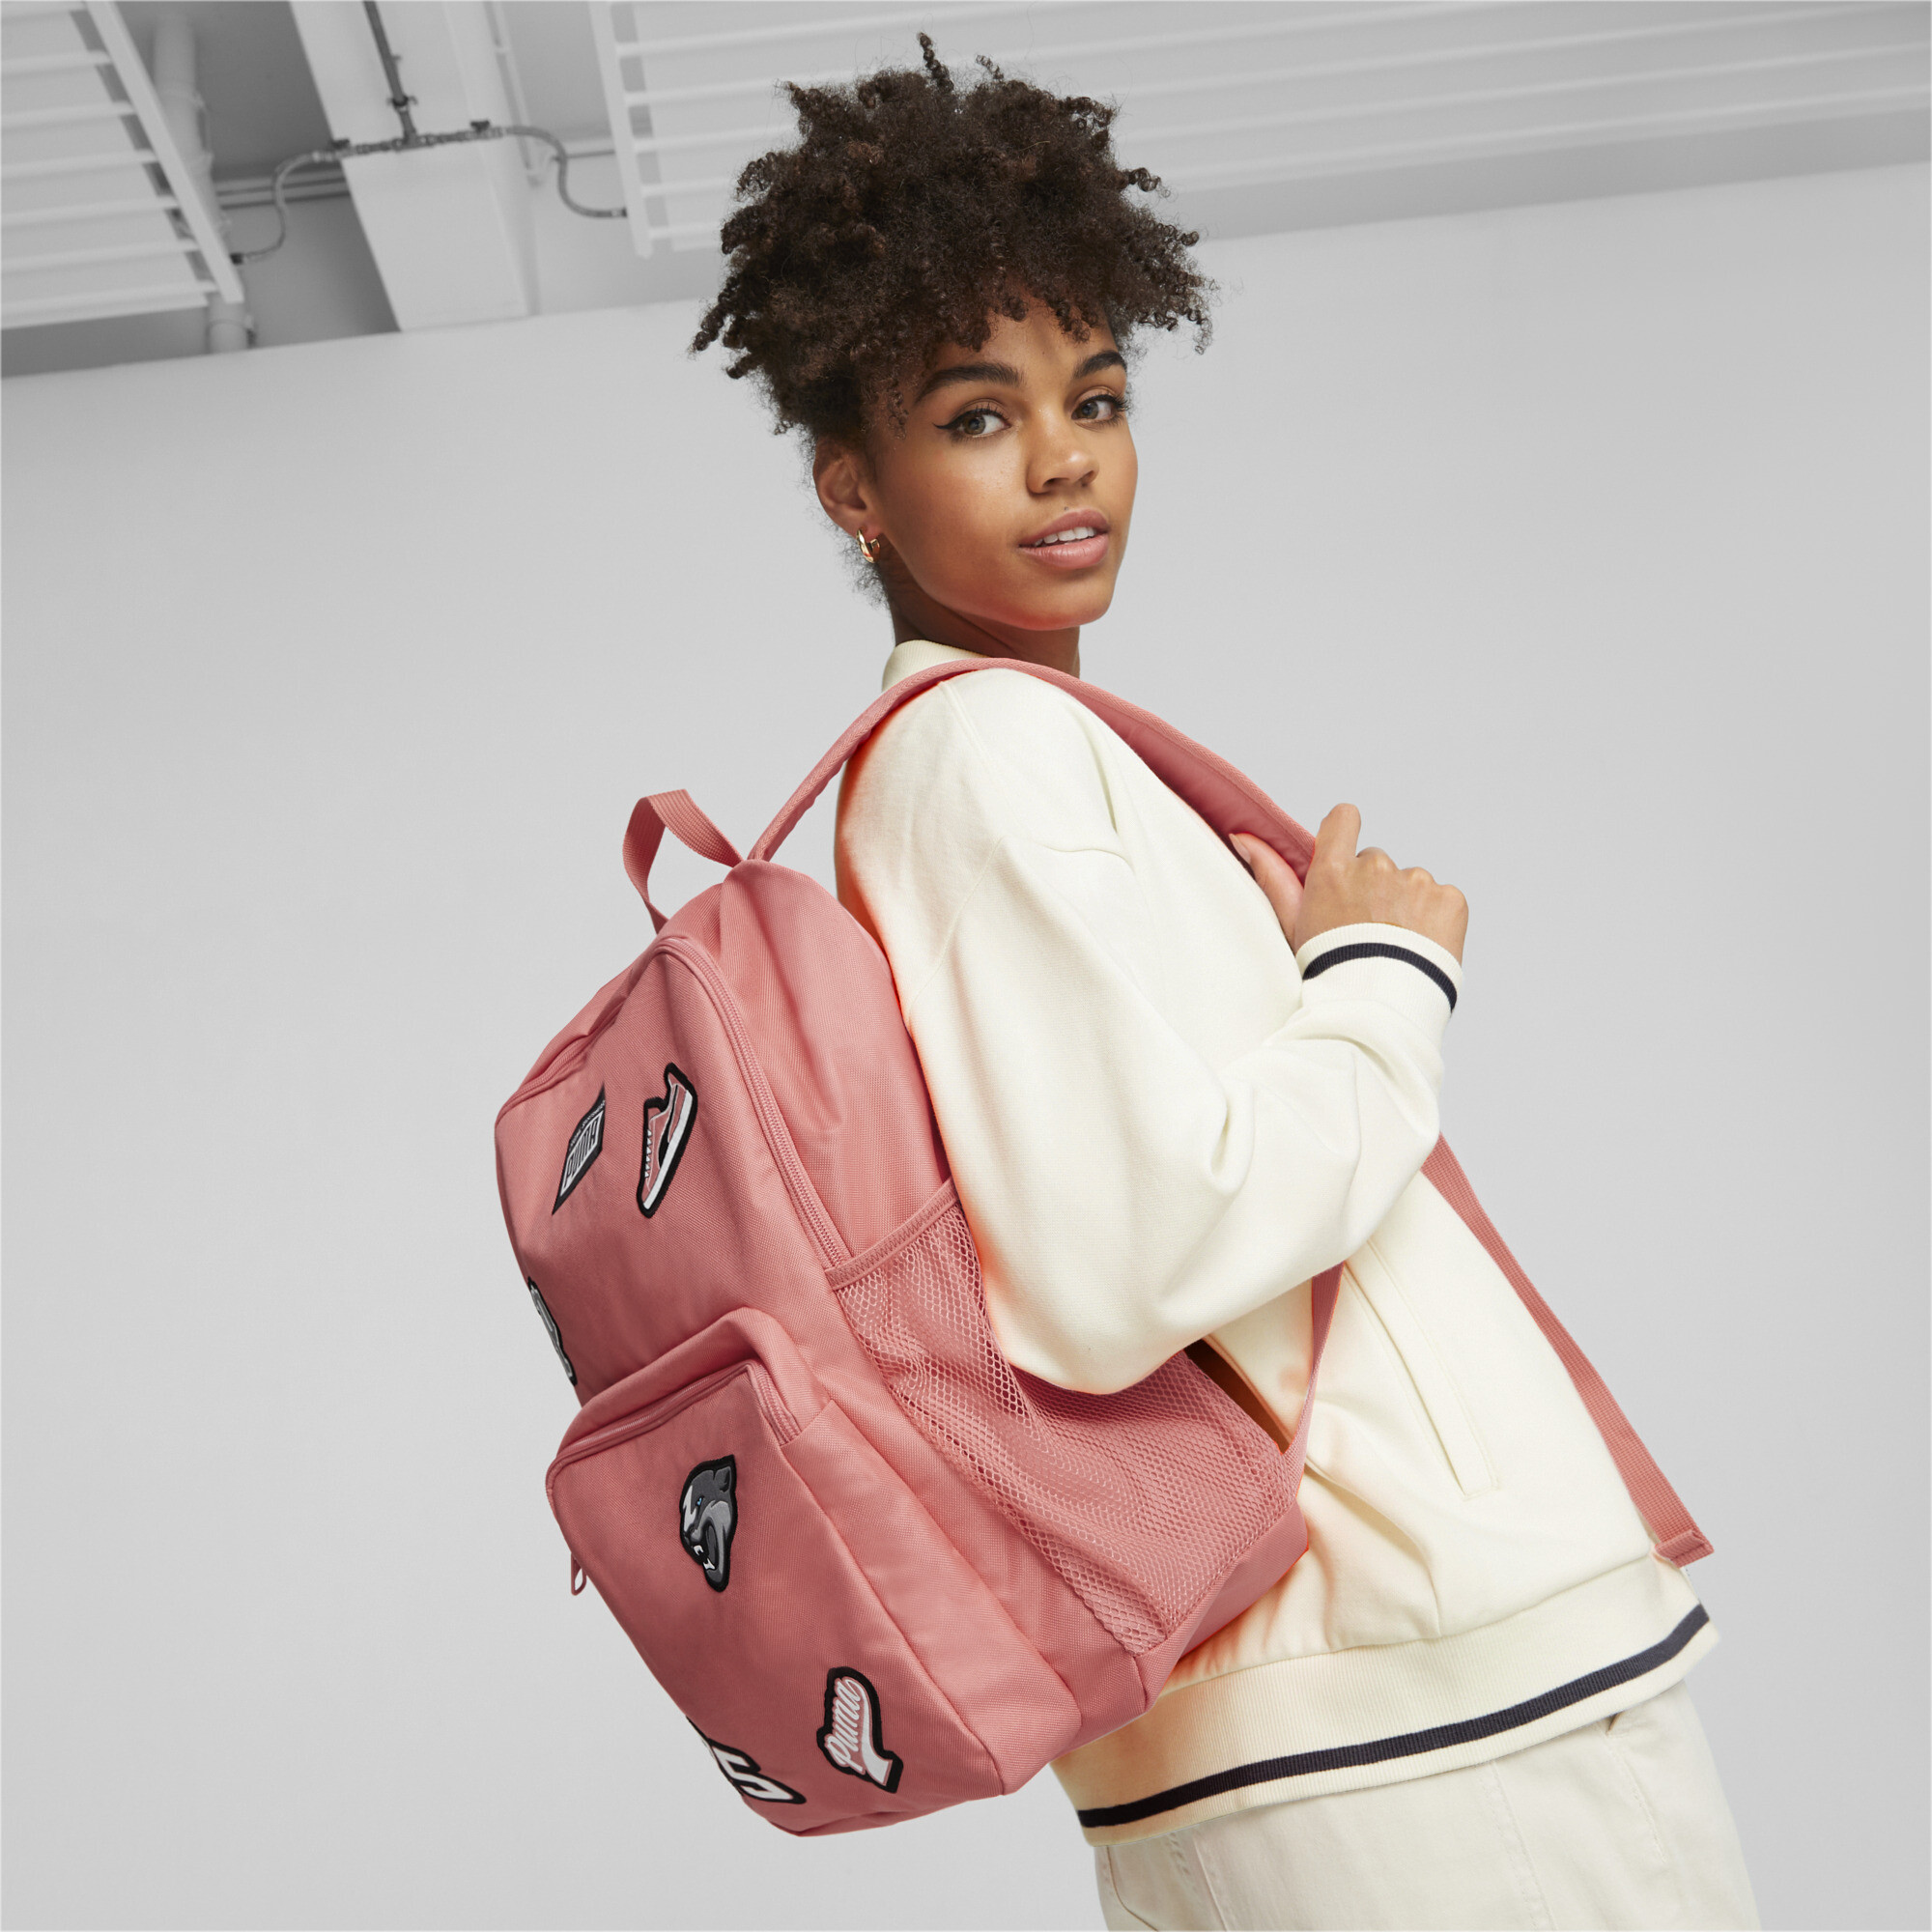 Puma Patch Backpack, Pink, Accessories